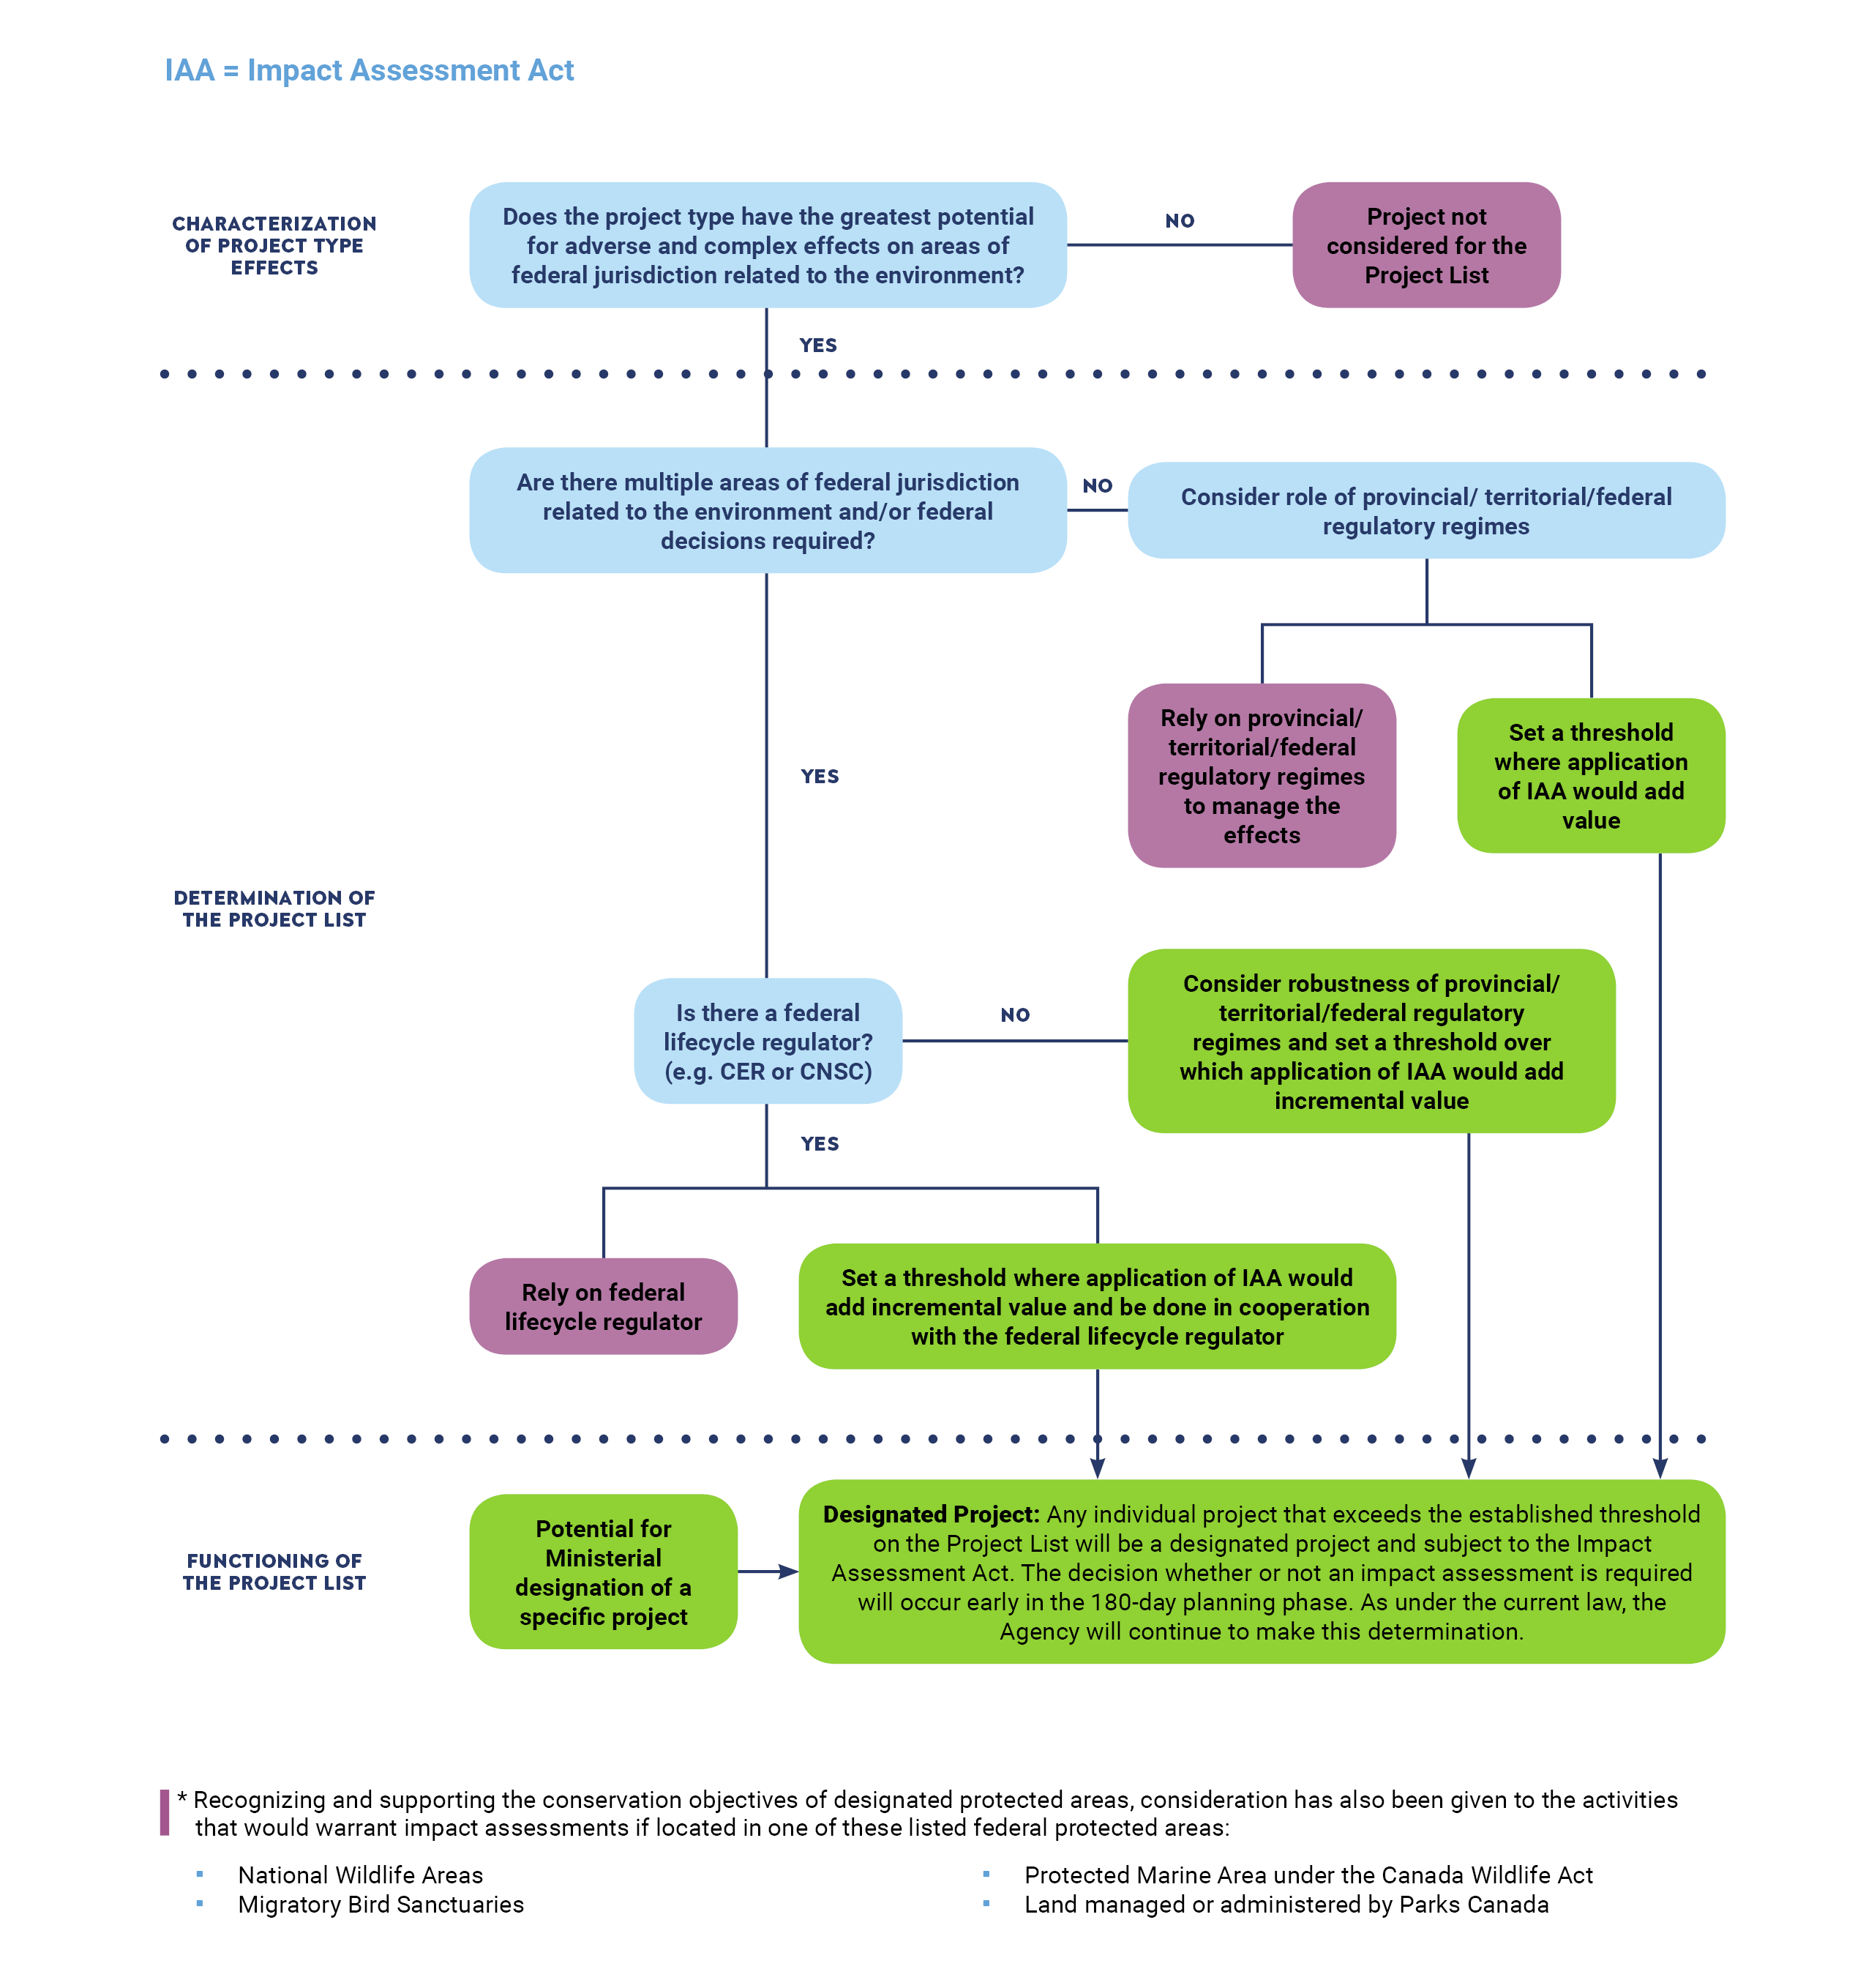 Figure - Decision tree for applying the approach to creating the new Project List